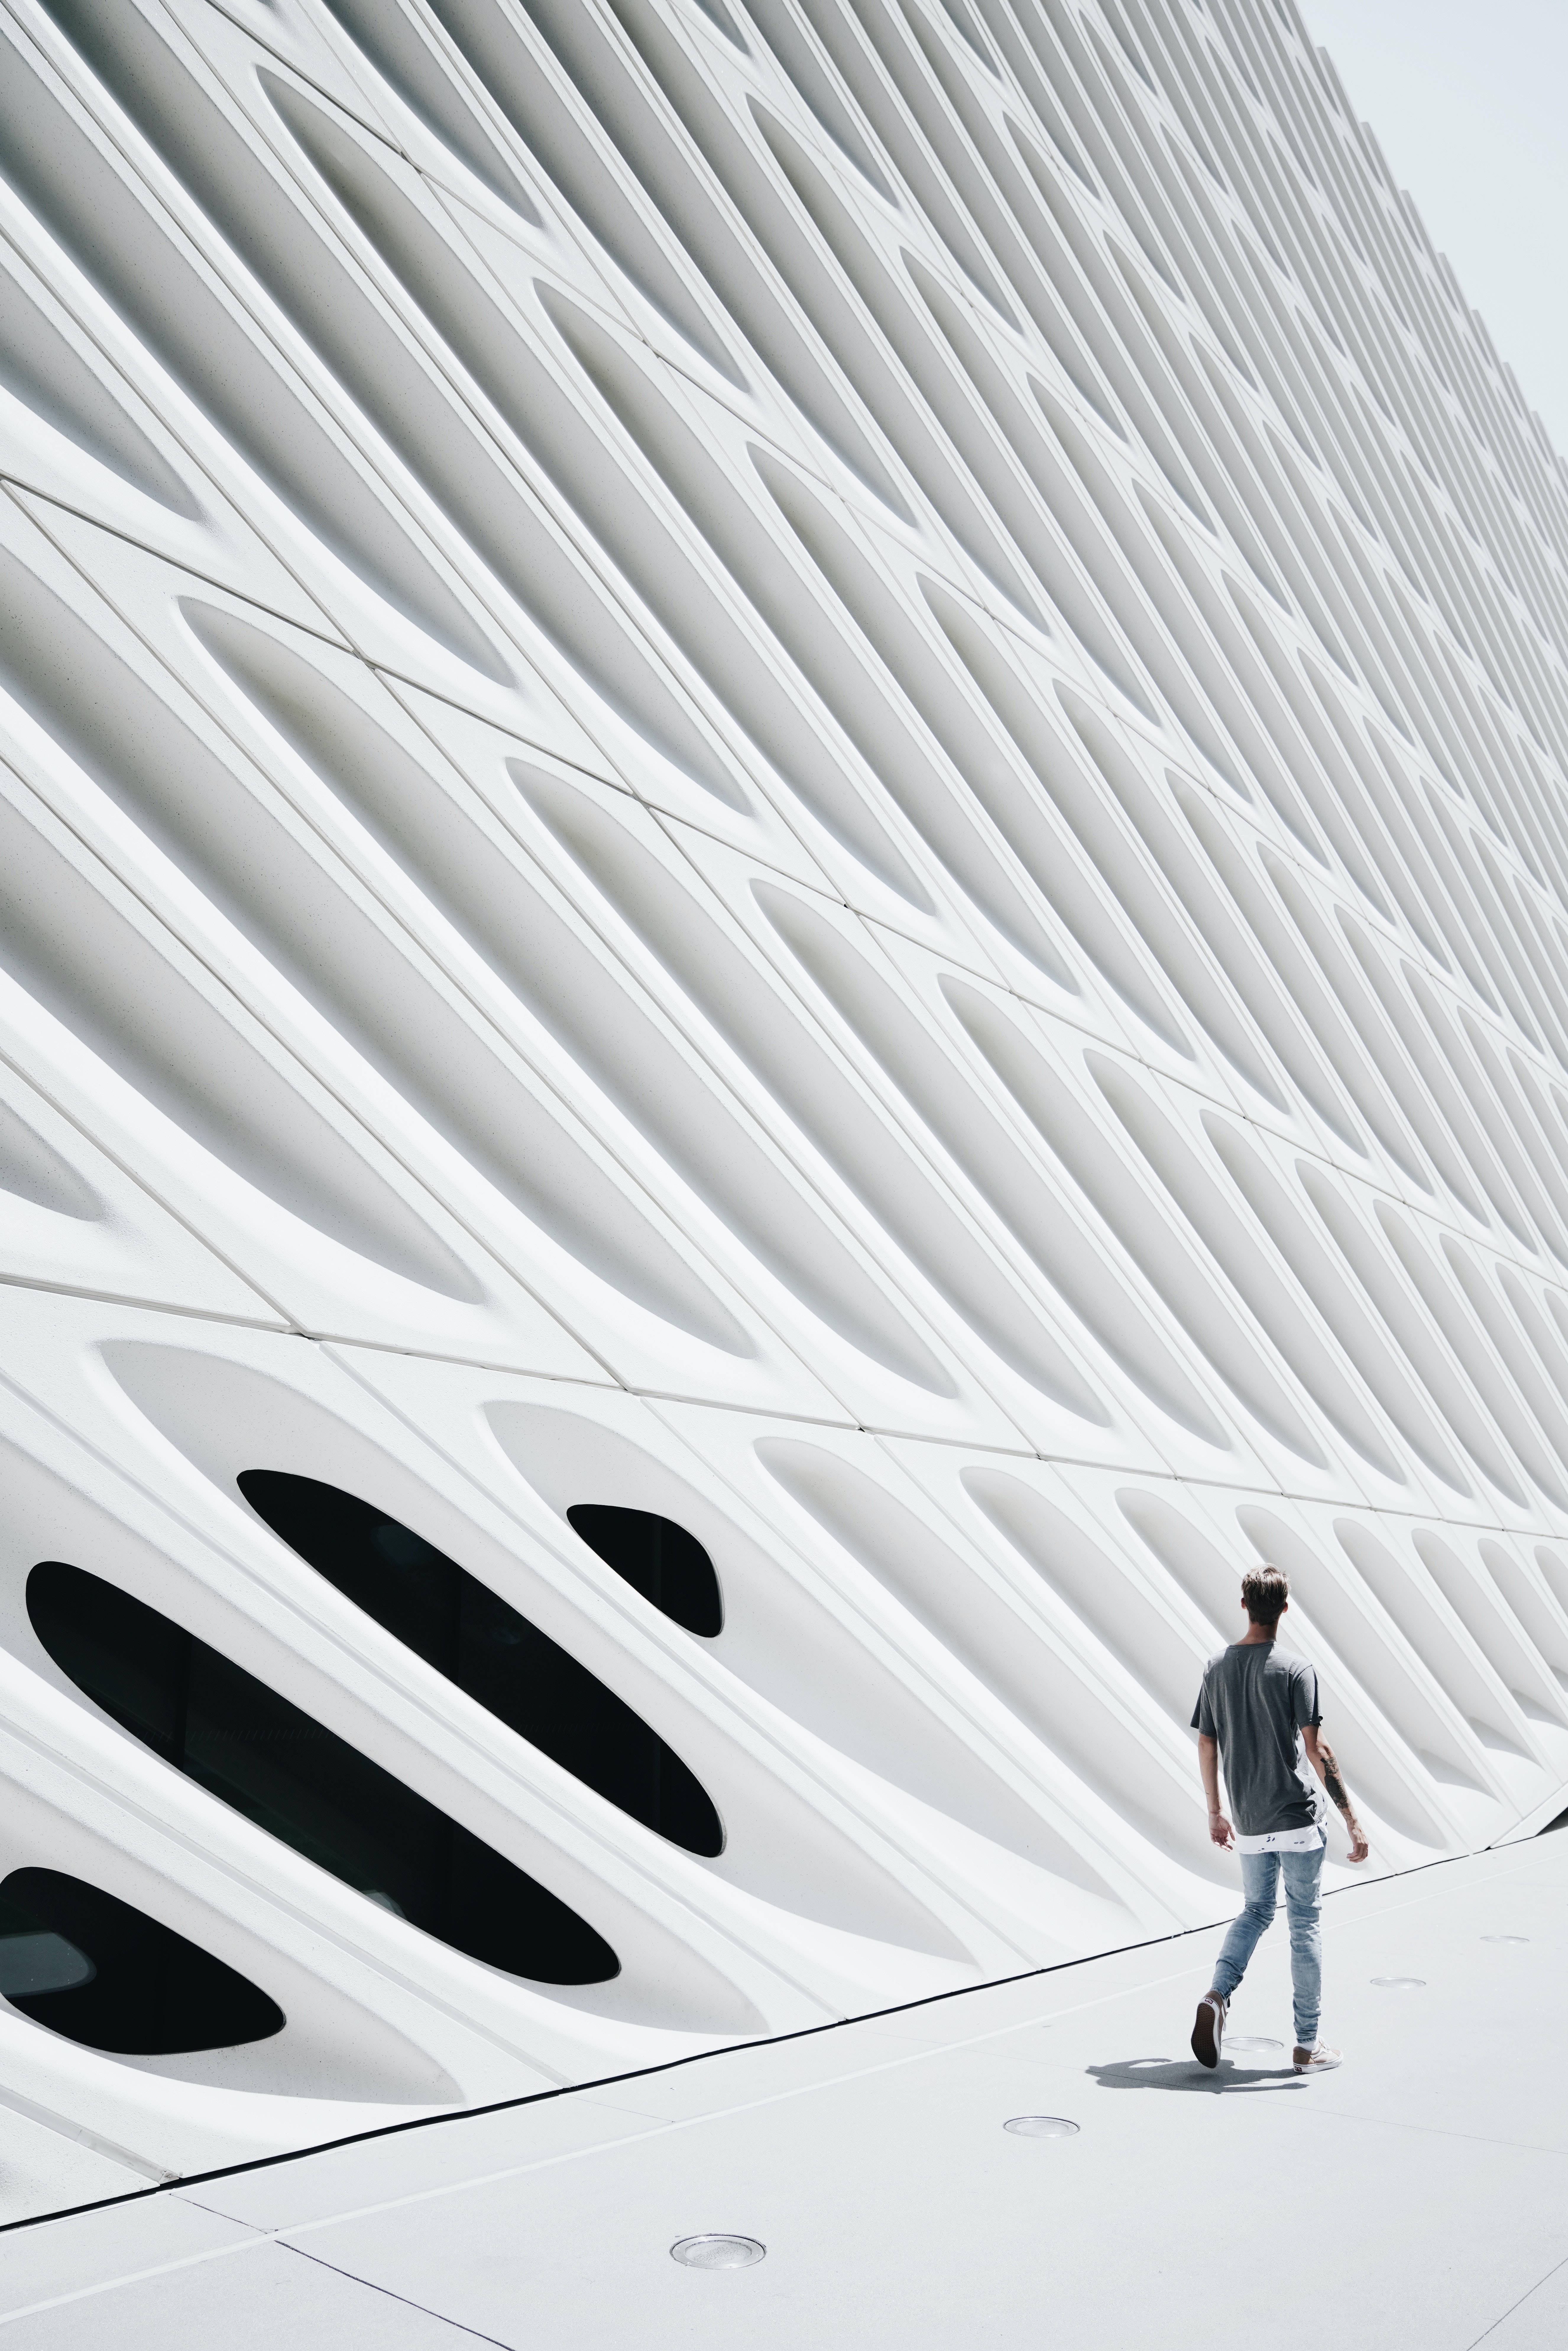 The Broad Museum All White Walls Picture